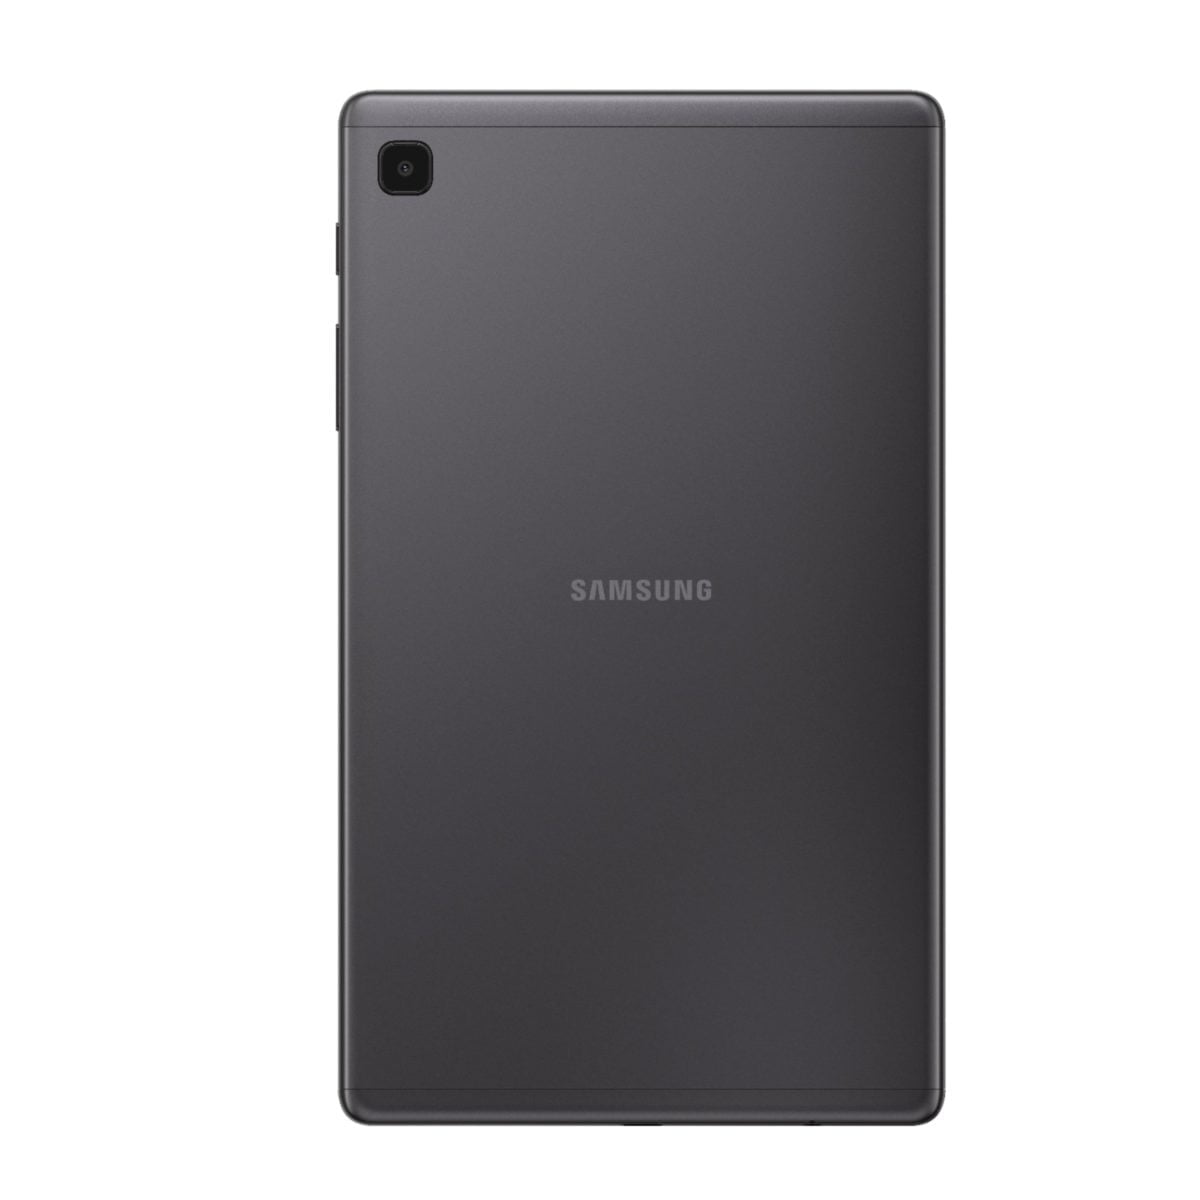 6464584Cv11D Scaled Samsung &Lt;H1&Gt;Samsung Galaxy Tab A7 Lite 32Gb - ‎Dark Gray&Lt;/H1&Gt; Meet The Device Your Whole Family Will Love: Samsung Galaxy Tab A7 Lite, The Tablet That'S Made To Be Shared. With Its Compact 8.7&Quot; Screen, Galaxy Tab A7 Lite Is Perfectly Sized For Entertainment On The Go. Its Sturdy Metal Frame Is Built To Be Brought Along From The Living Room To Your Beach Vacation, Or Wherever You Want To Take It. Galaxy Tab A7 Lite Comes With Access To Hours Of Ad-Free Youtube Premium And Samsung Tv At No Extra Charge So You Can Keep The Family Happy Without Annoying Interruptions. Plus, With A Powerful Processor For Fast Streaming And Plenty Of Storage For Your Favorite Files, Galaxy Tab A7 Lite Simplifies Entertainment Needs For Everyone Under Your Roof. Samsung Galaxy Tab Samsung Galaxy Tab A7 Lite 32Gb Wi-Fi - ‎Dark Gray